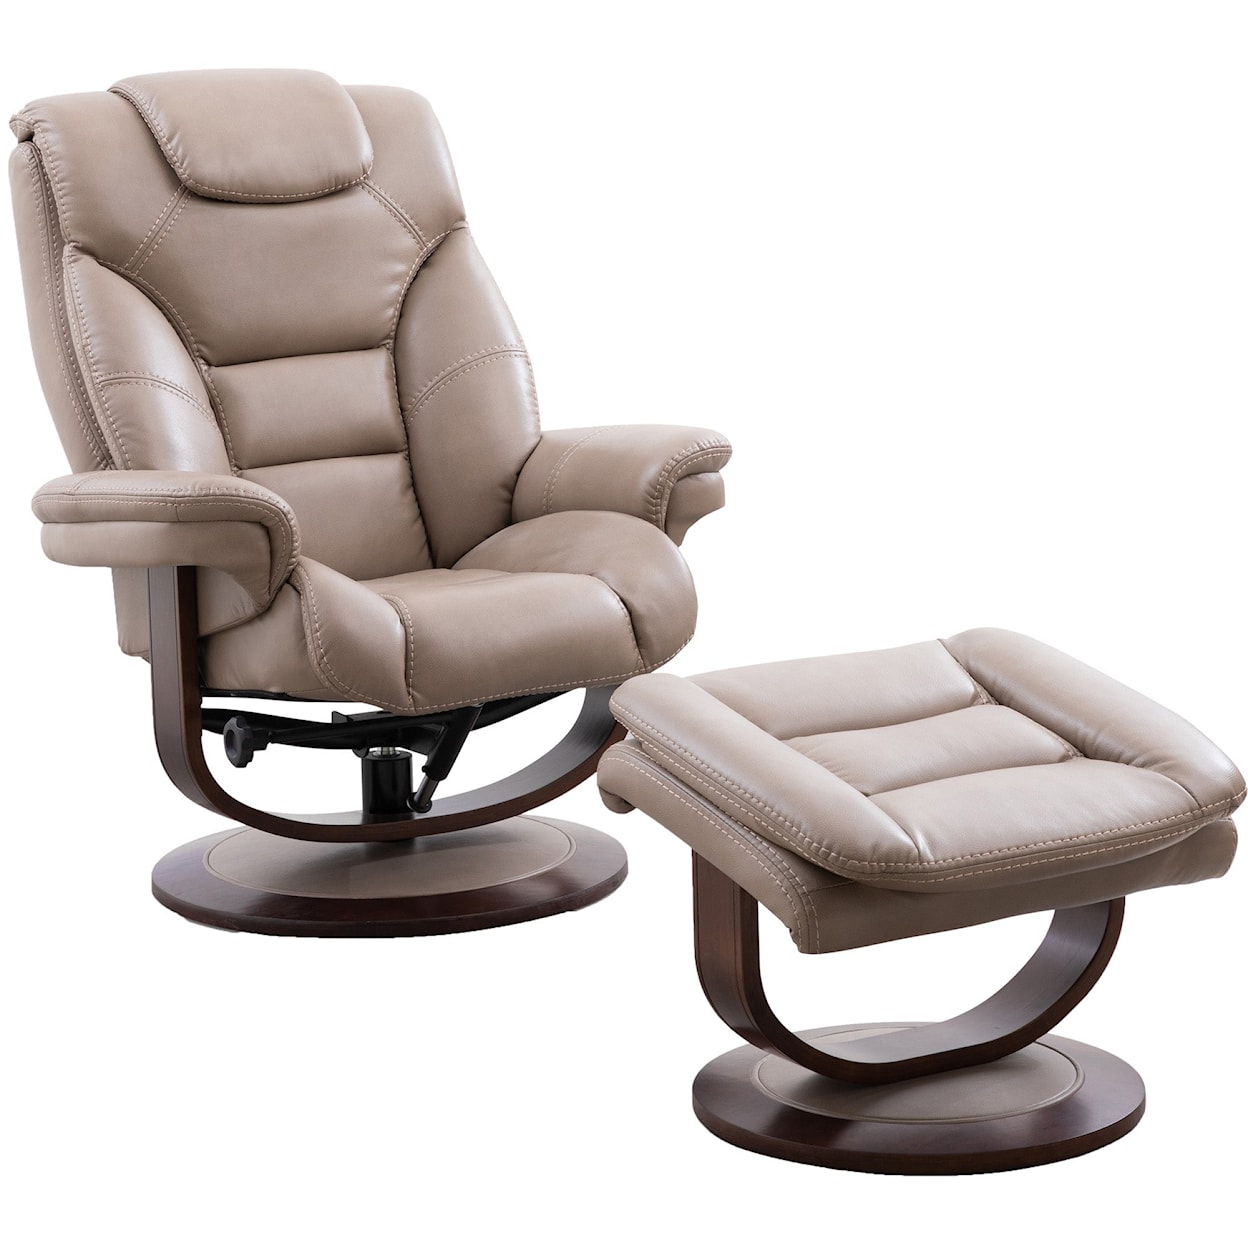 Paramount Living Monarch Manual Reclining Swivel Chair and Ottoman